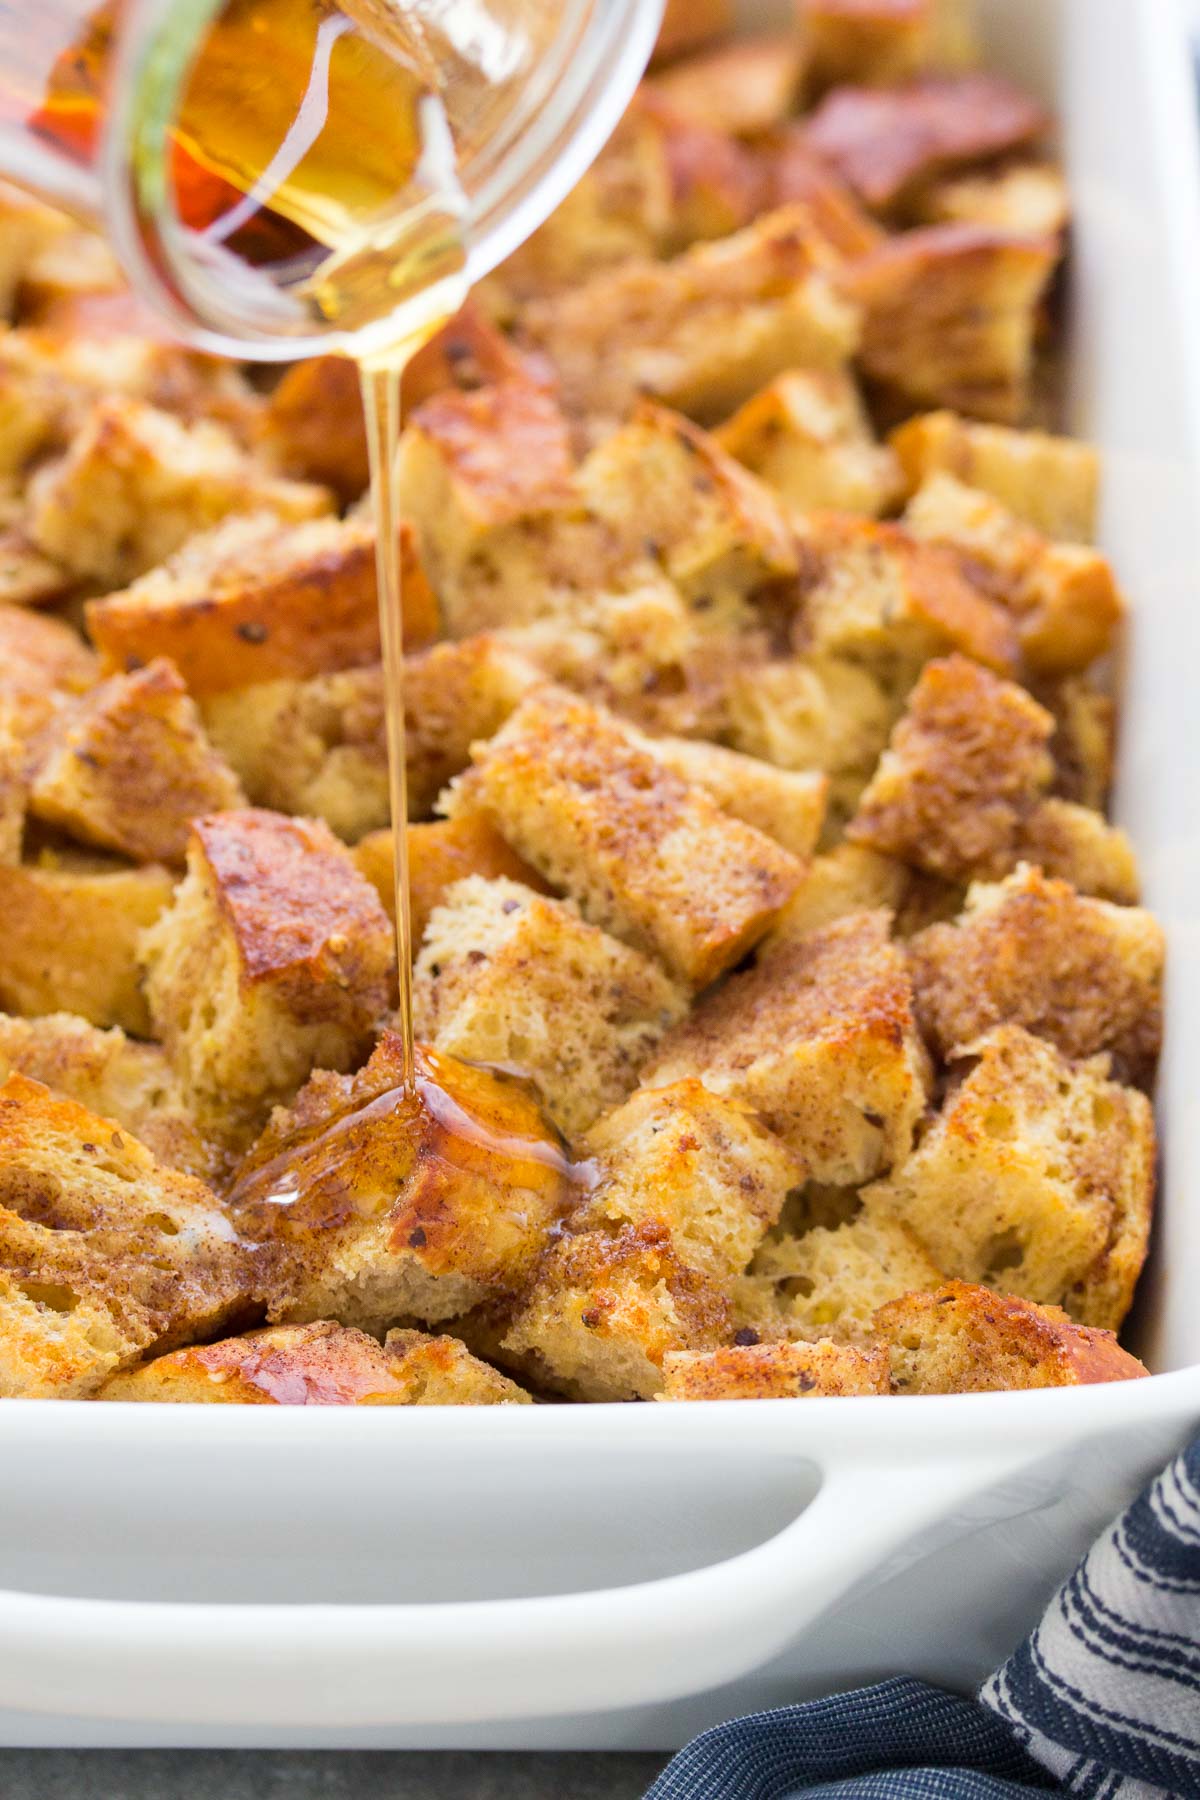 Pouring syrup over french toast casserole in baking dish.